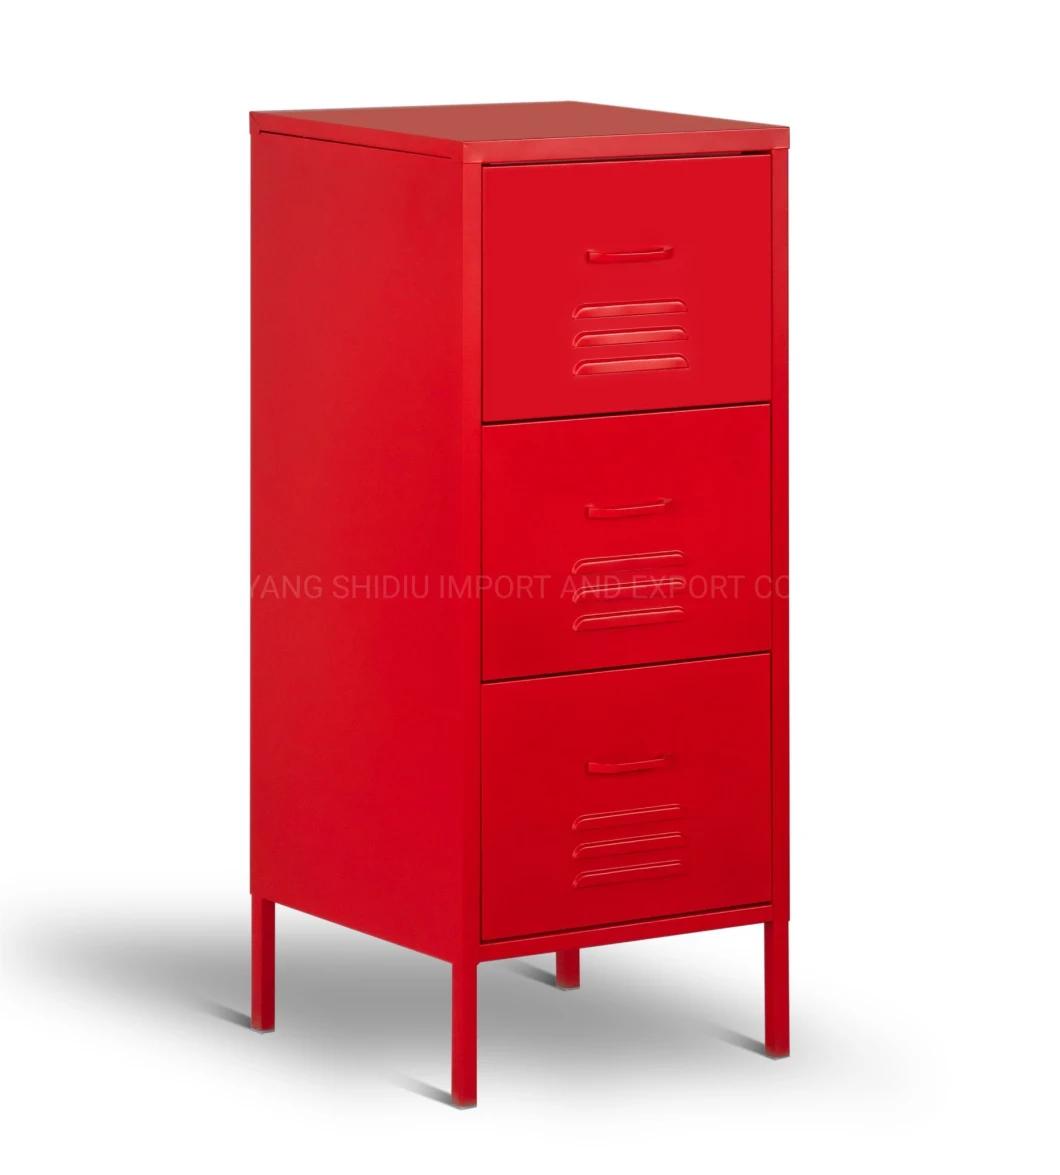 Metal Decorative Cabinets with 3 Drawers for Home Use in Living Room